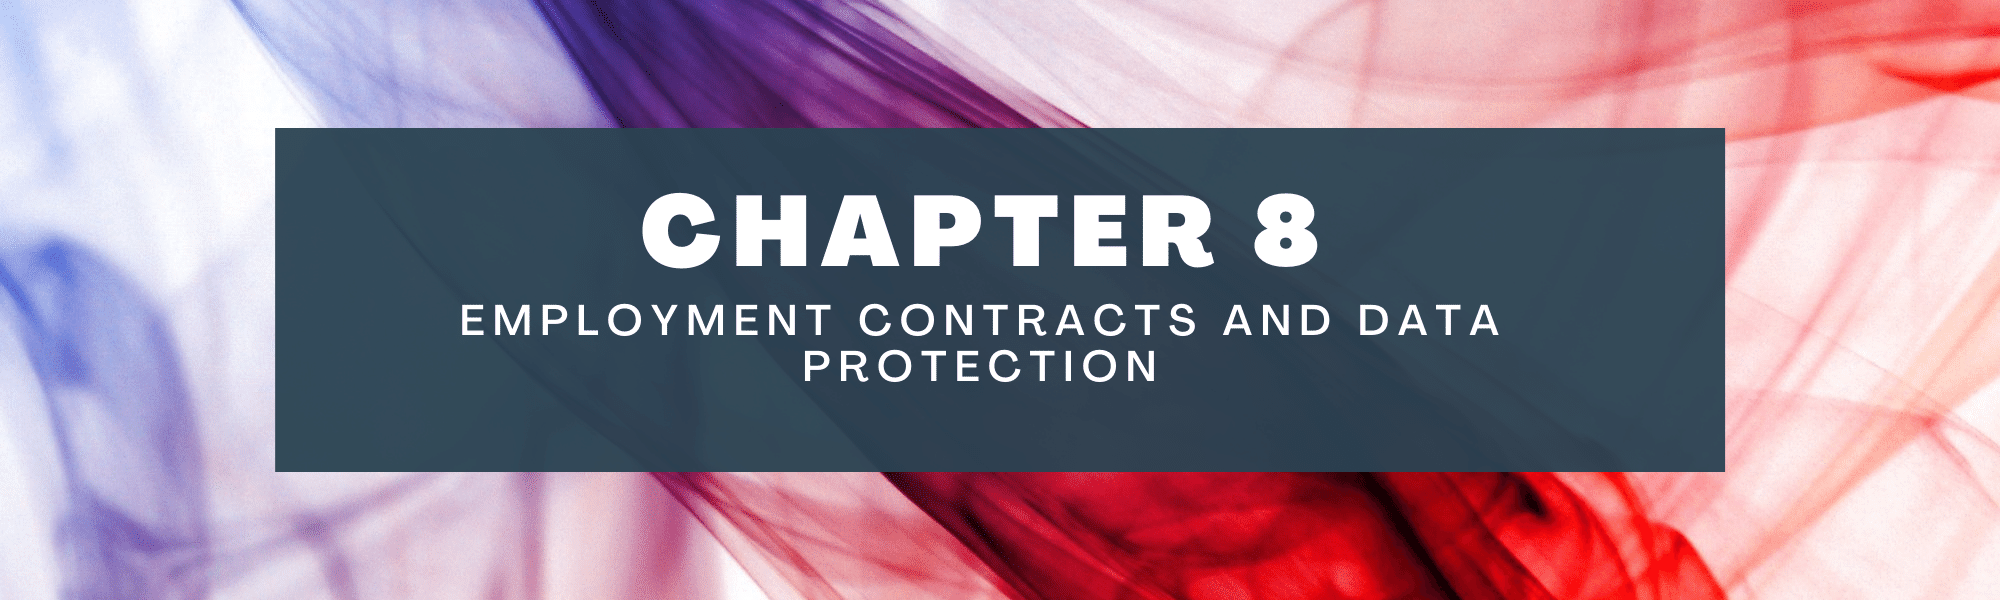 employment contracts and data protection